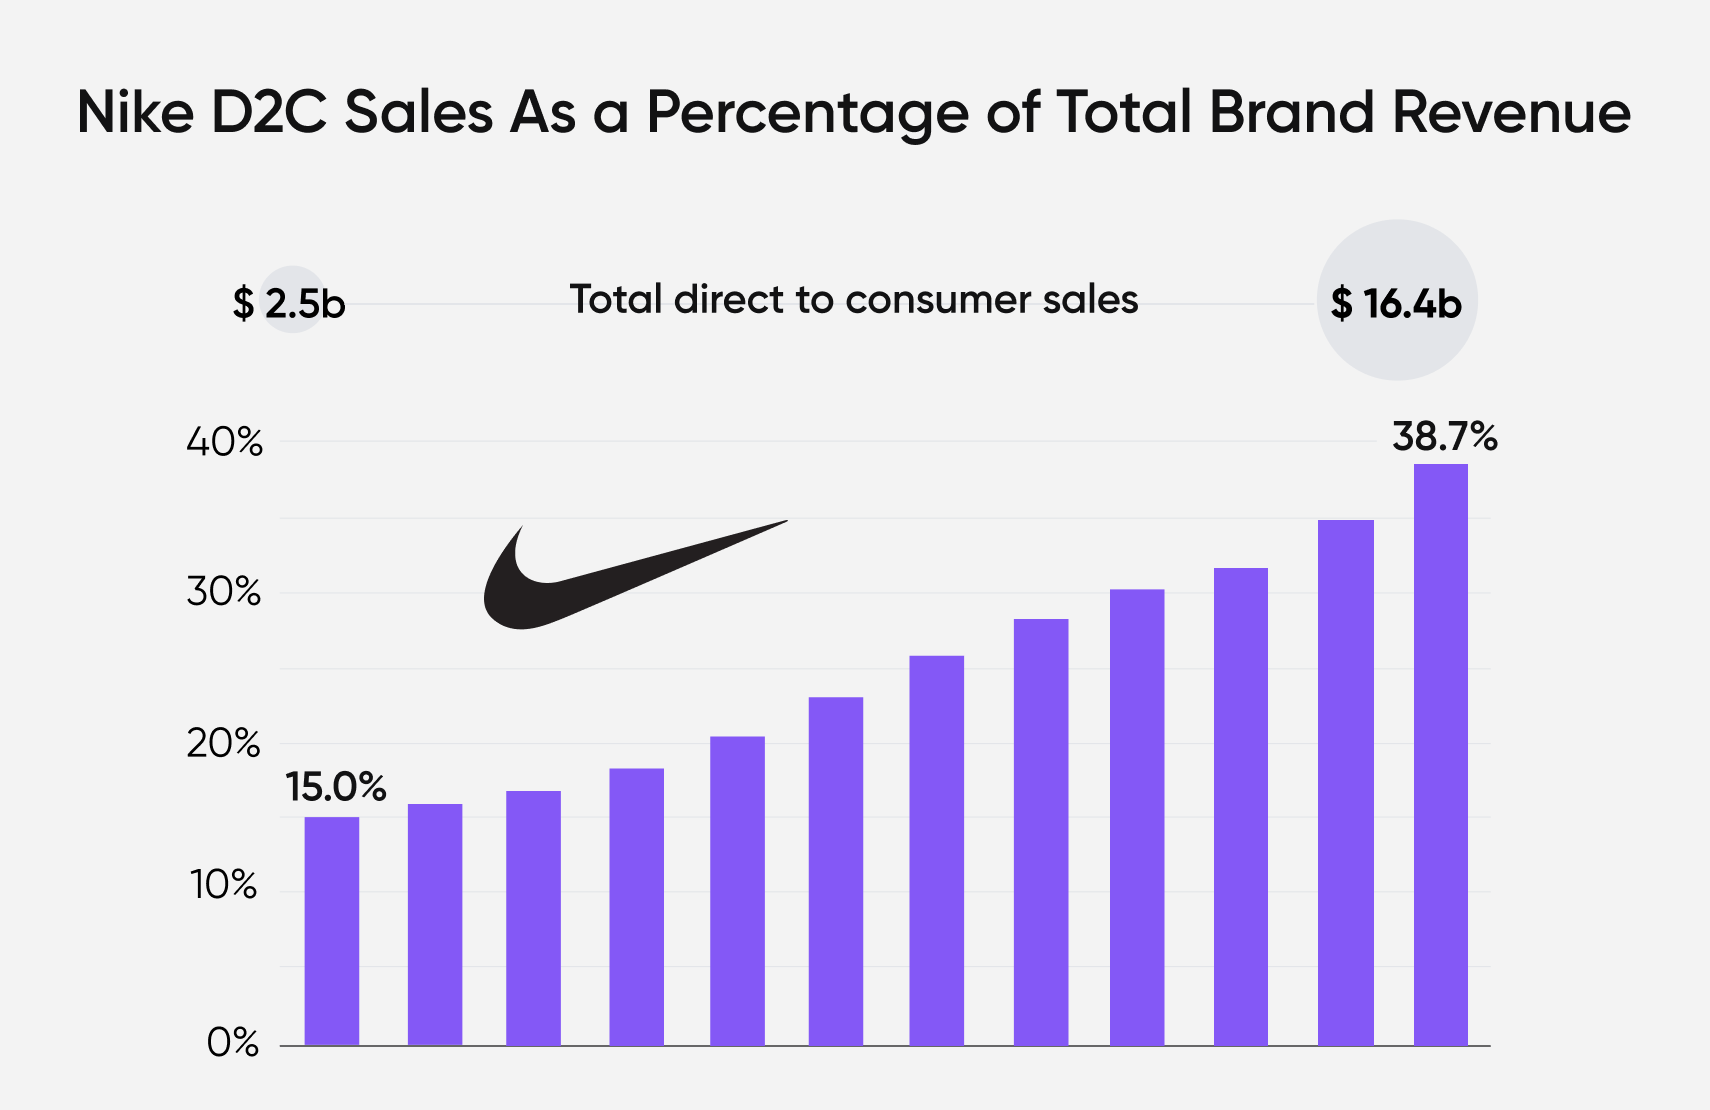 Nike D2C sales as a percentage of total brand revenue